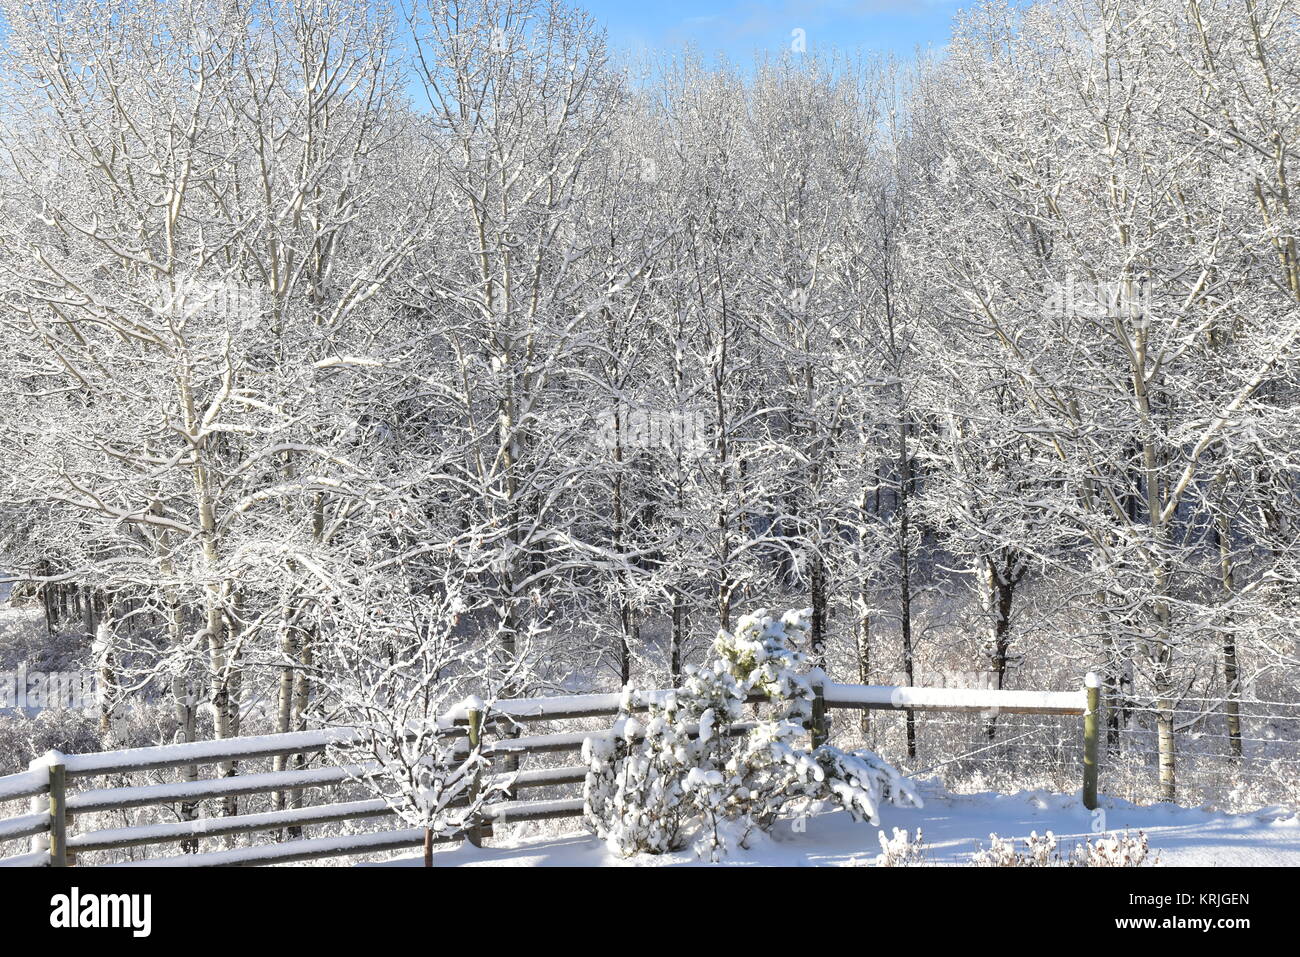 Winter wonderland on a beautiful cold day. Taken on December 18, 2017 at 11:00 A.M. Stock Photo